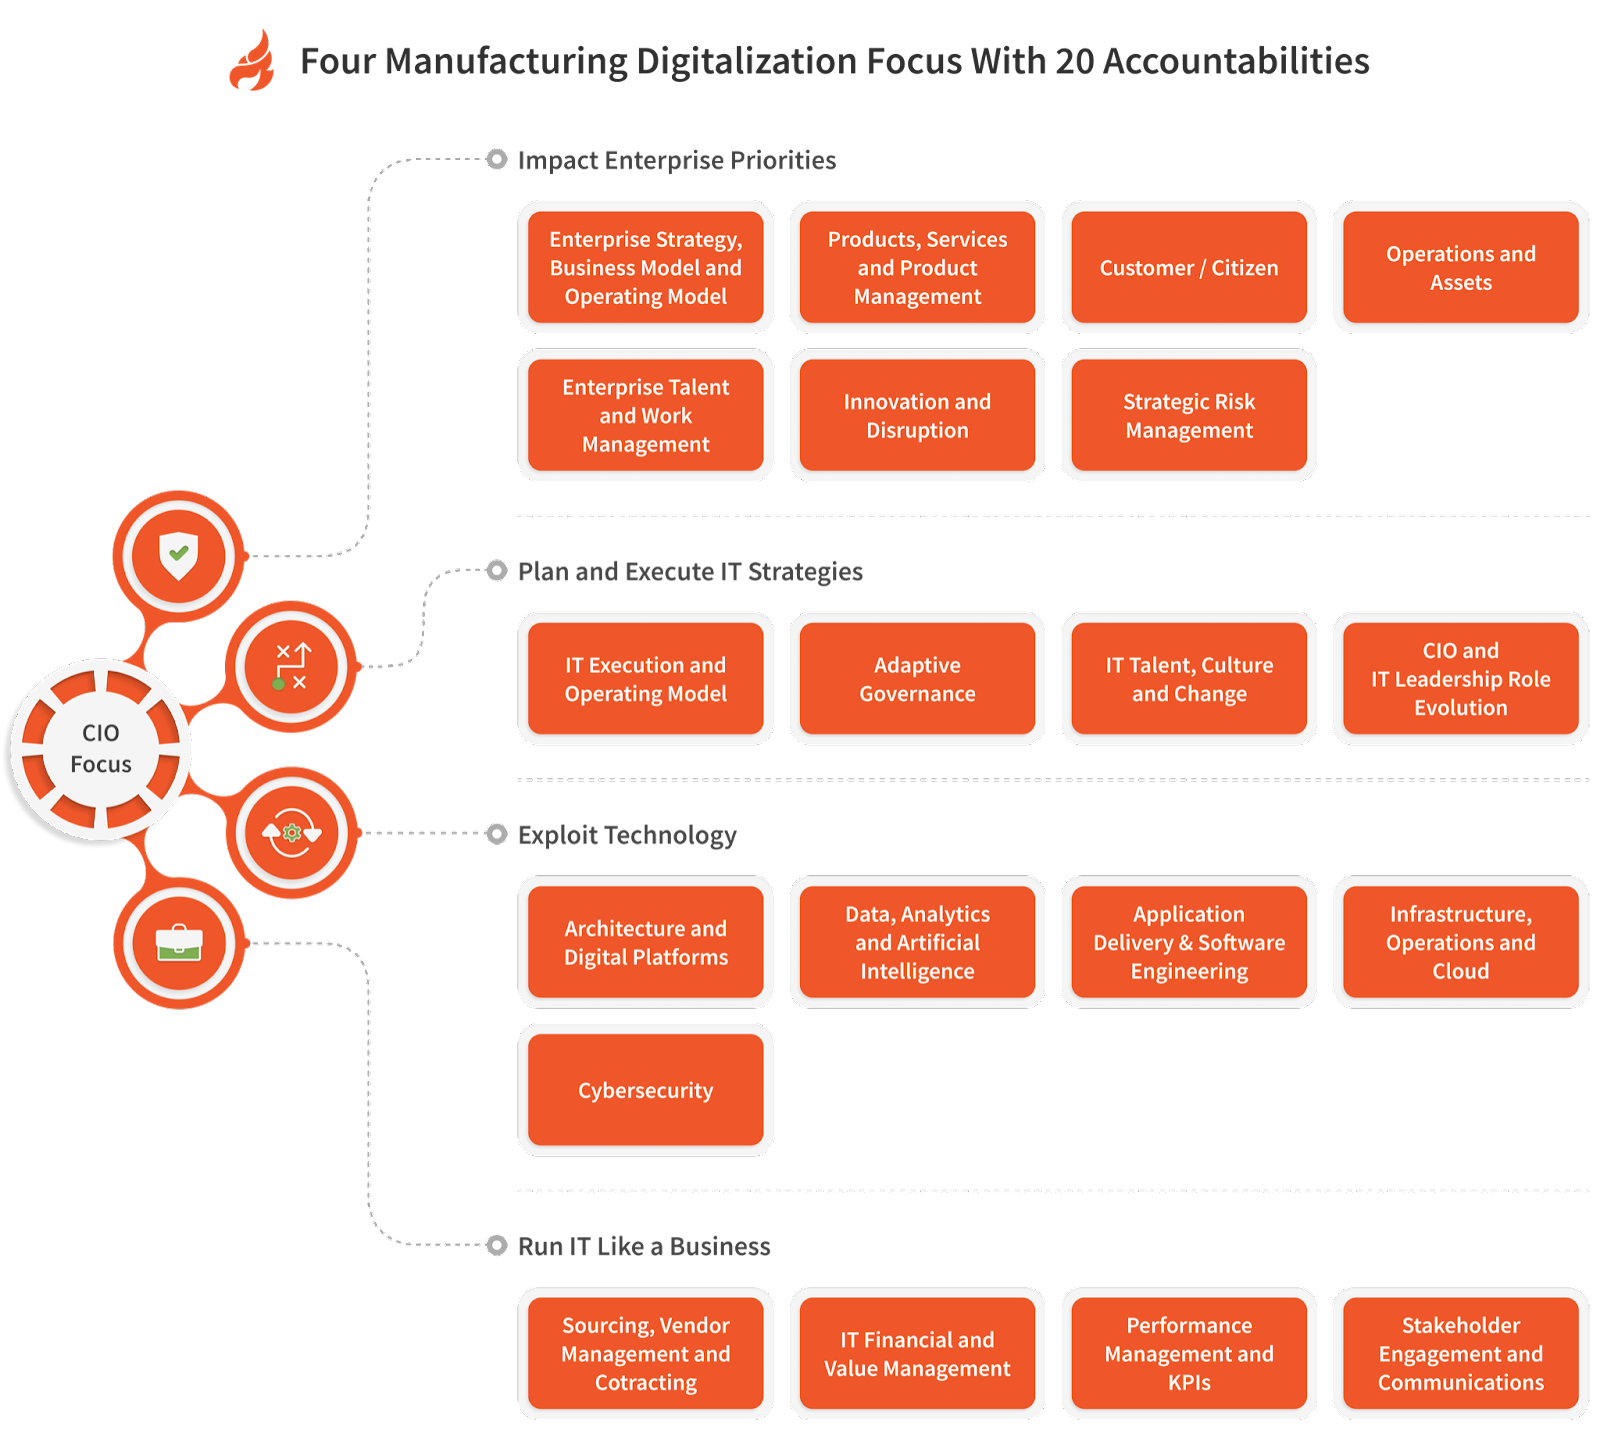 Four Manufacturing Digitalization Focus with 20 Accountabilities